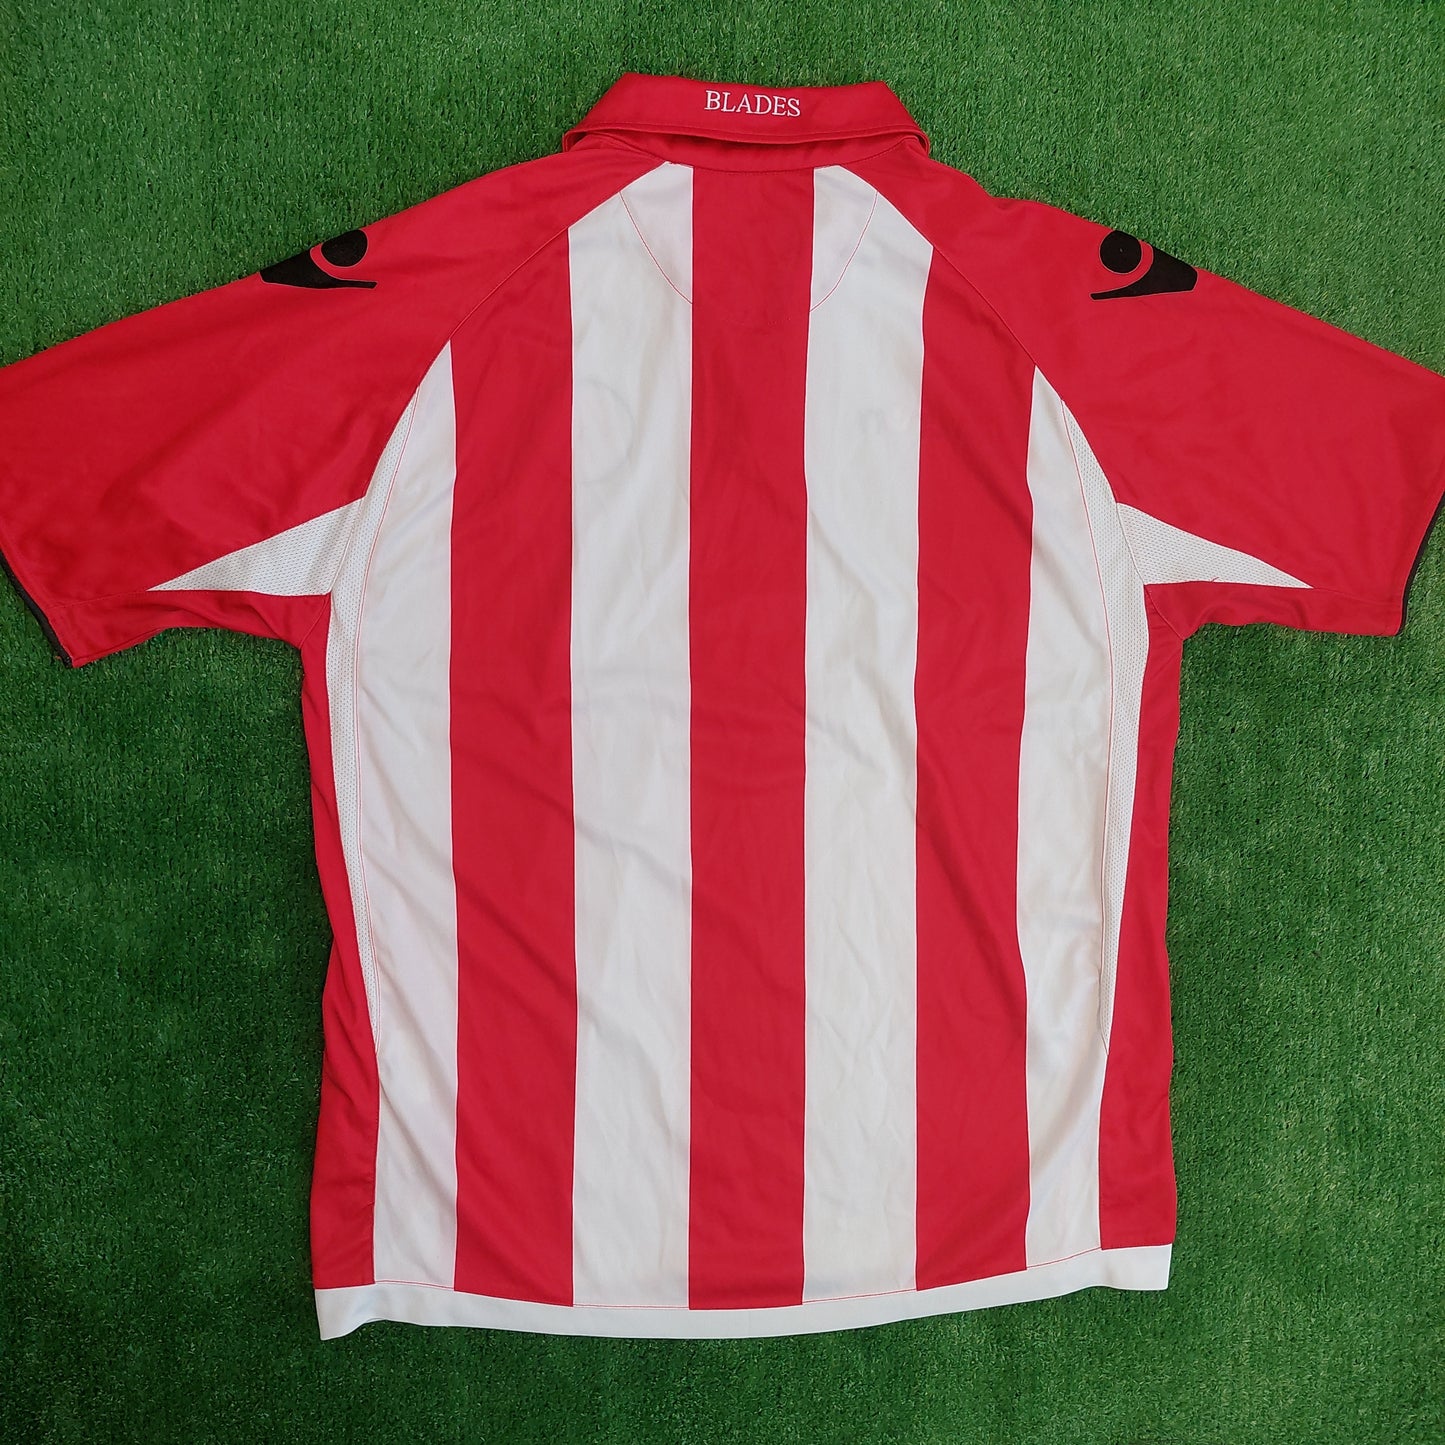 Sheffield United 2009/10 Home Shirt (Very Good) - Size L